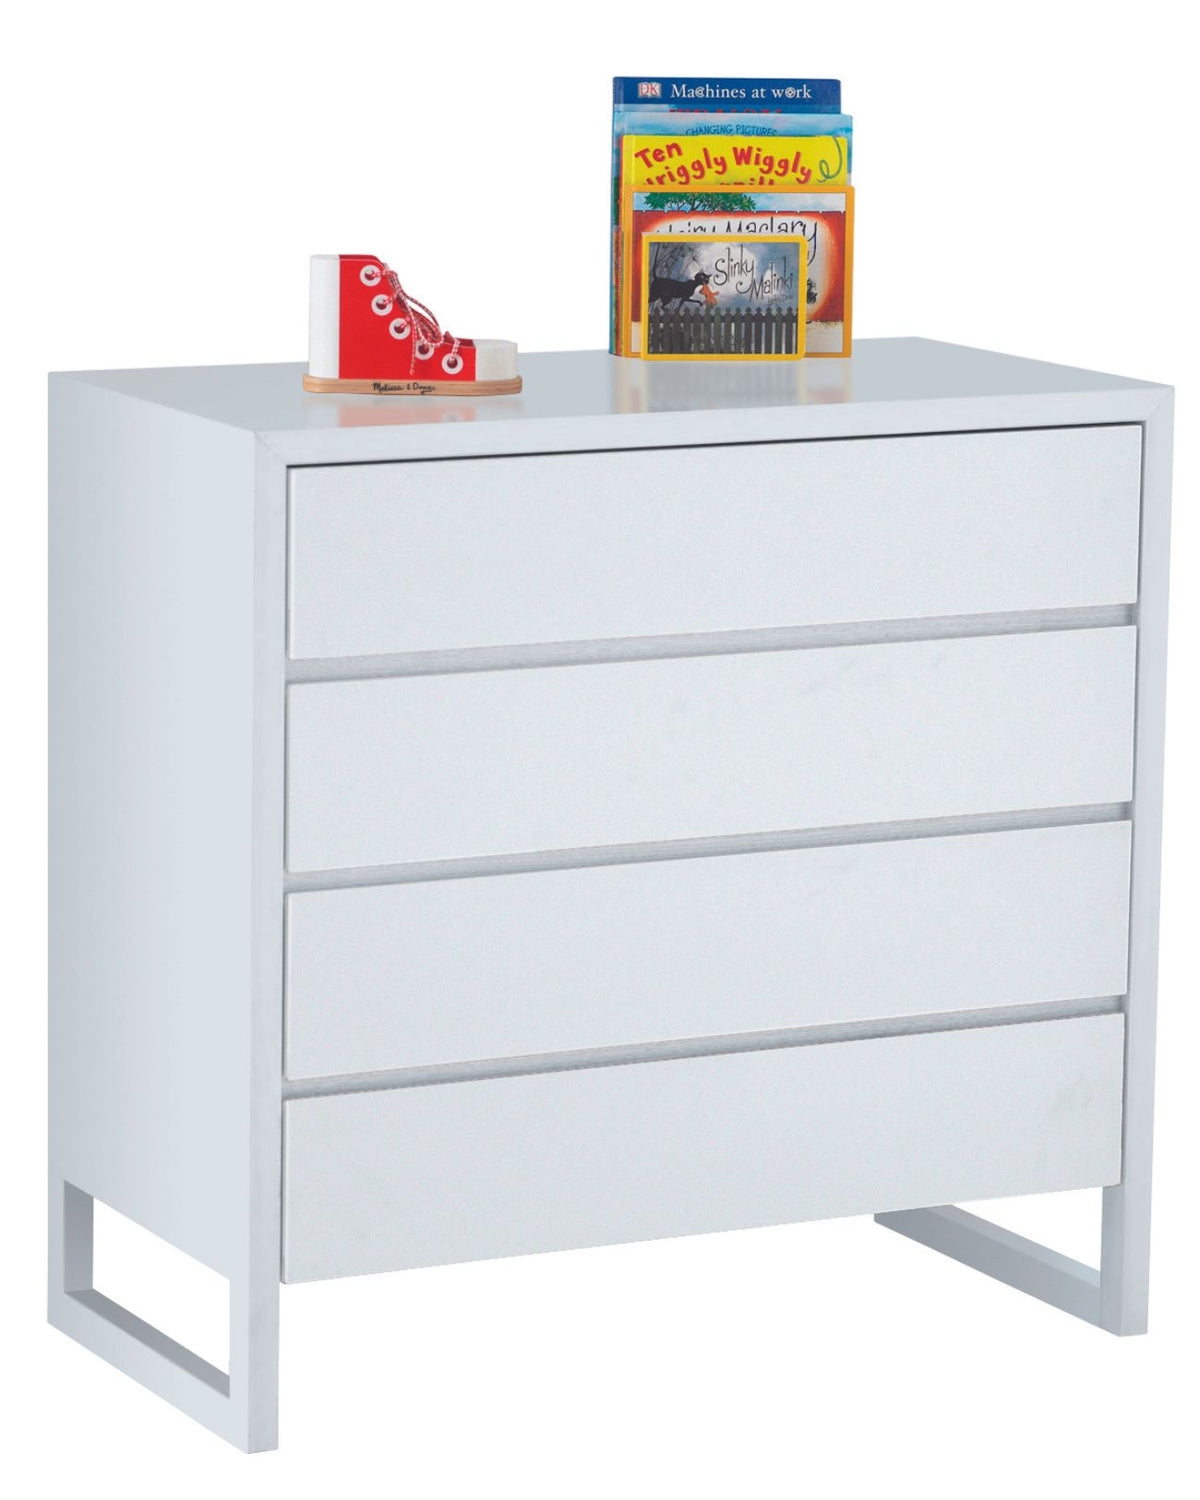 COLOUR BOX CHEST OF DRAWERS | SHOWROOM DISPLAY